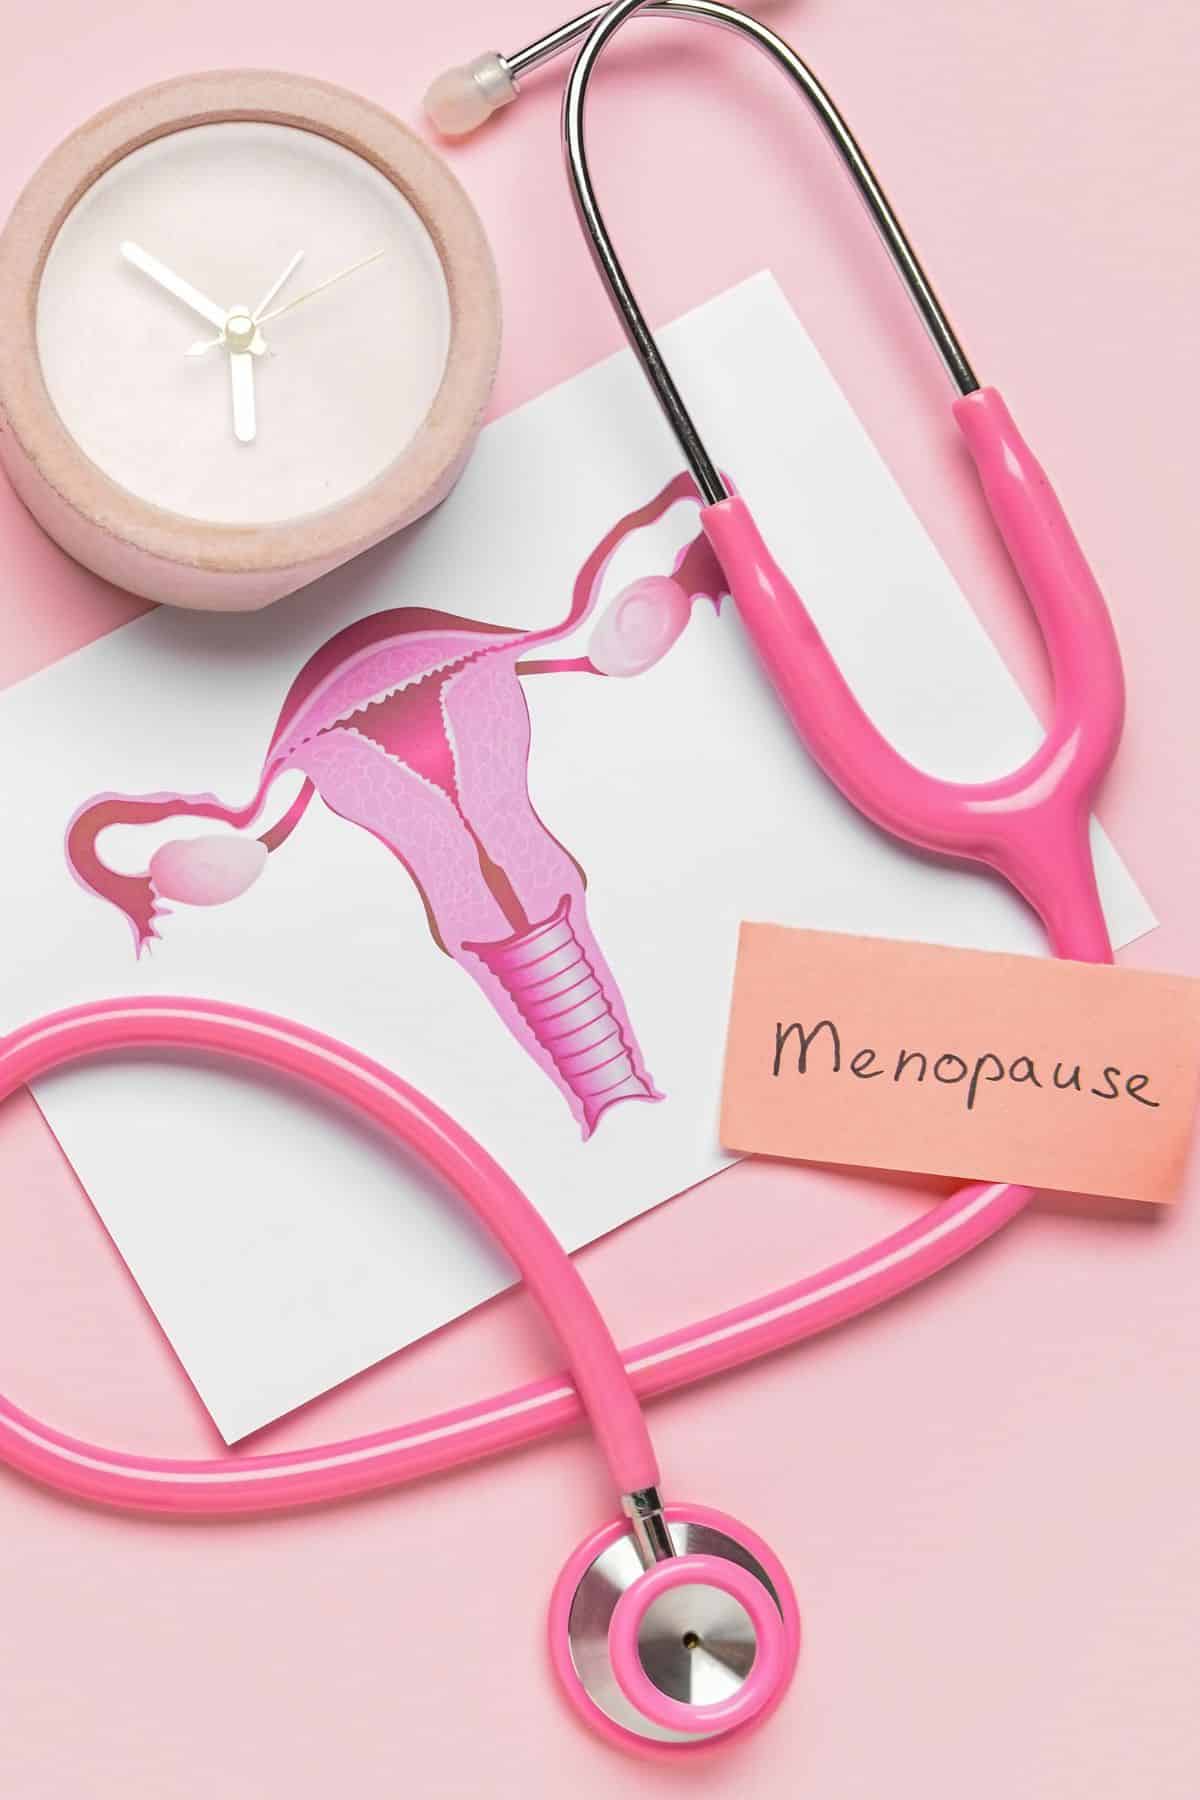 a clock, a stethoscope, a picture of a uterus and the word "menopause" on a piece of paper on a table.